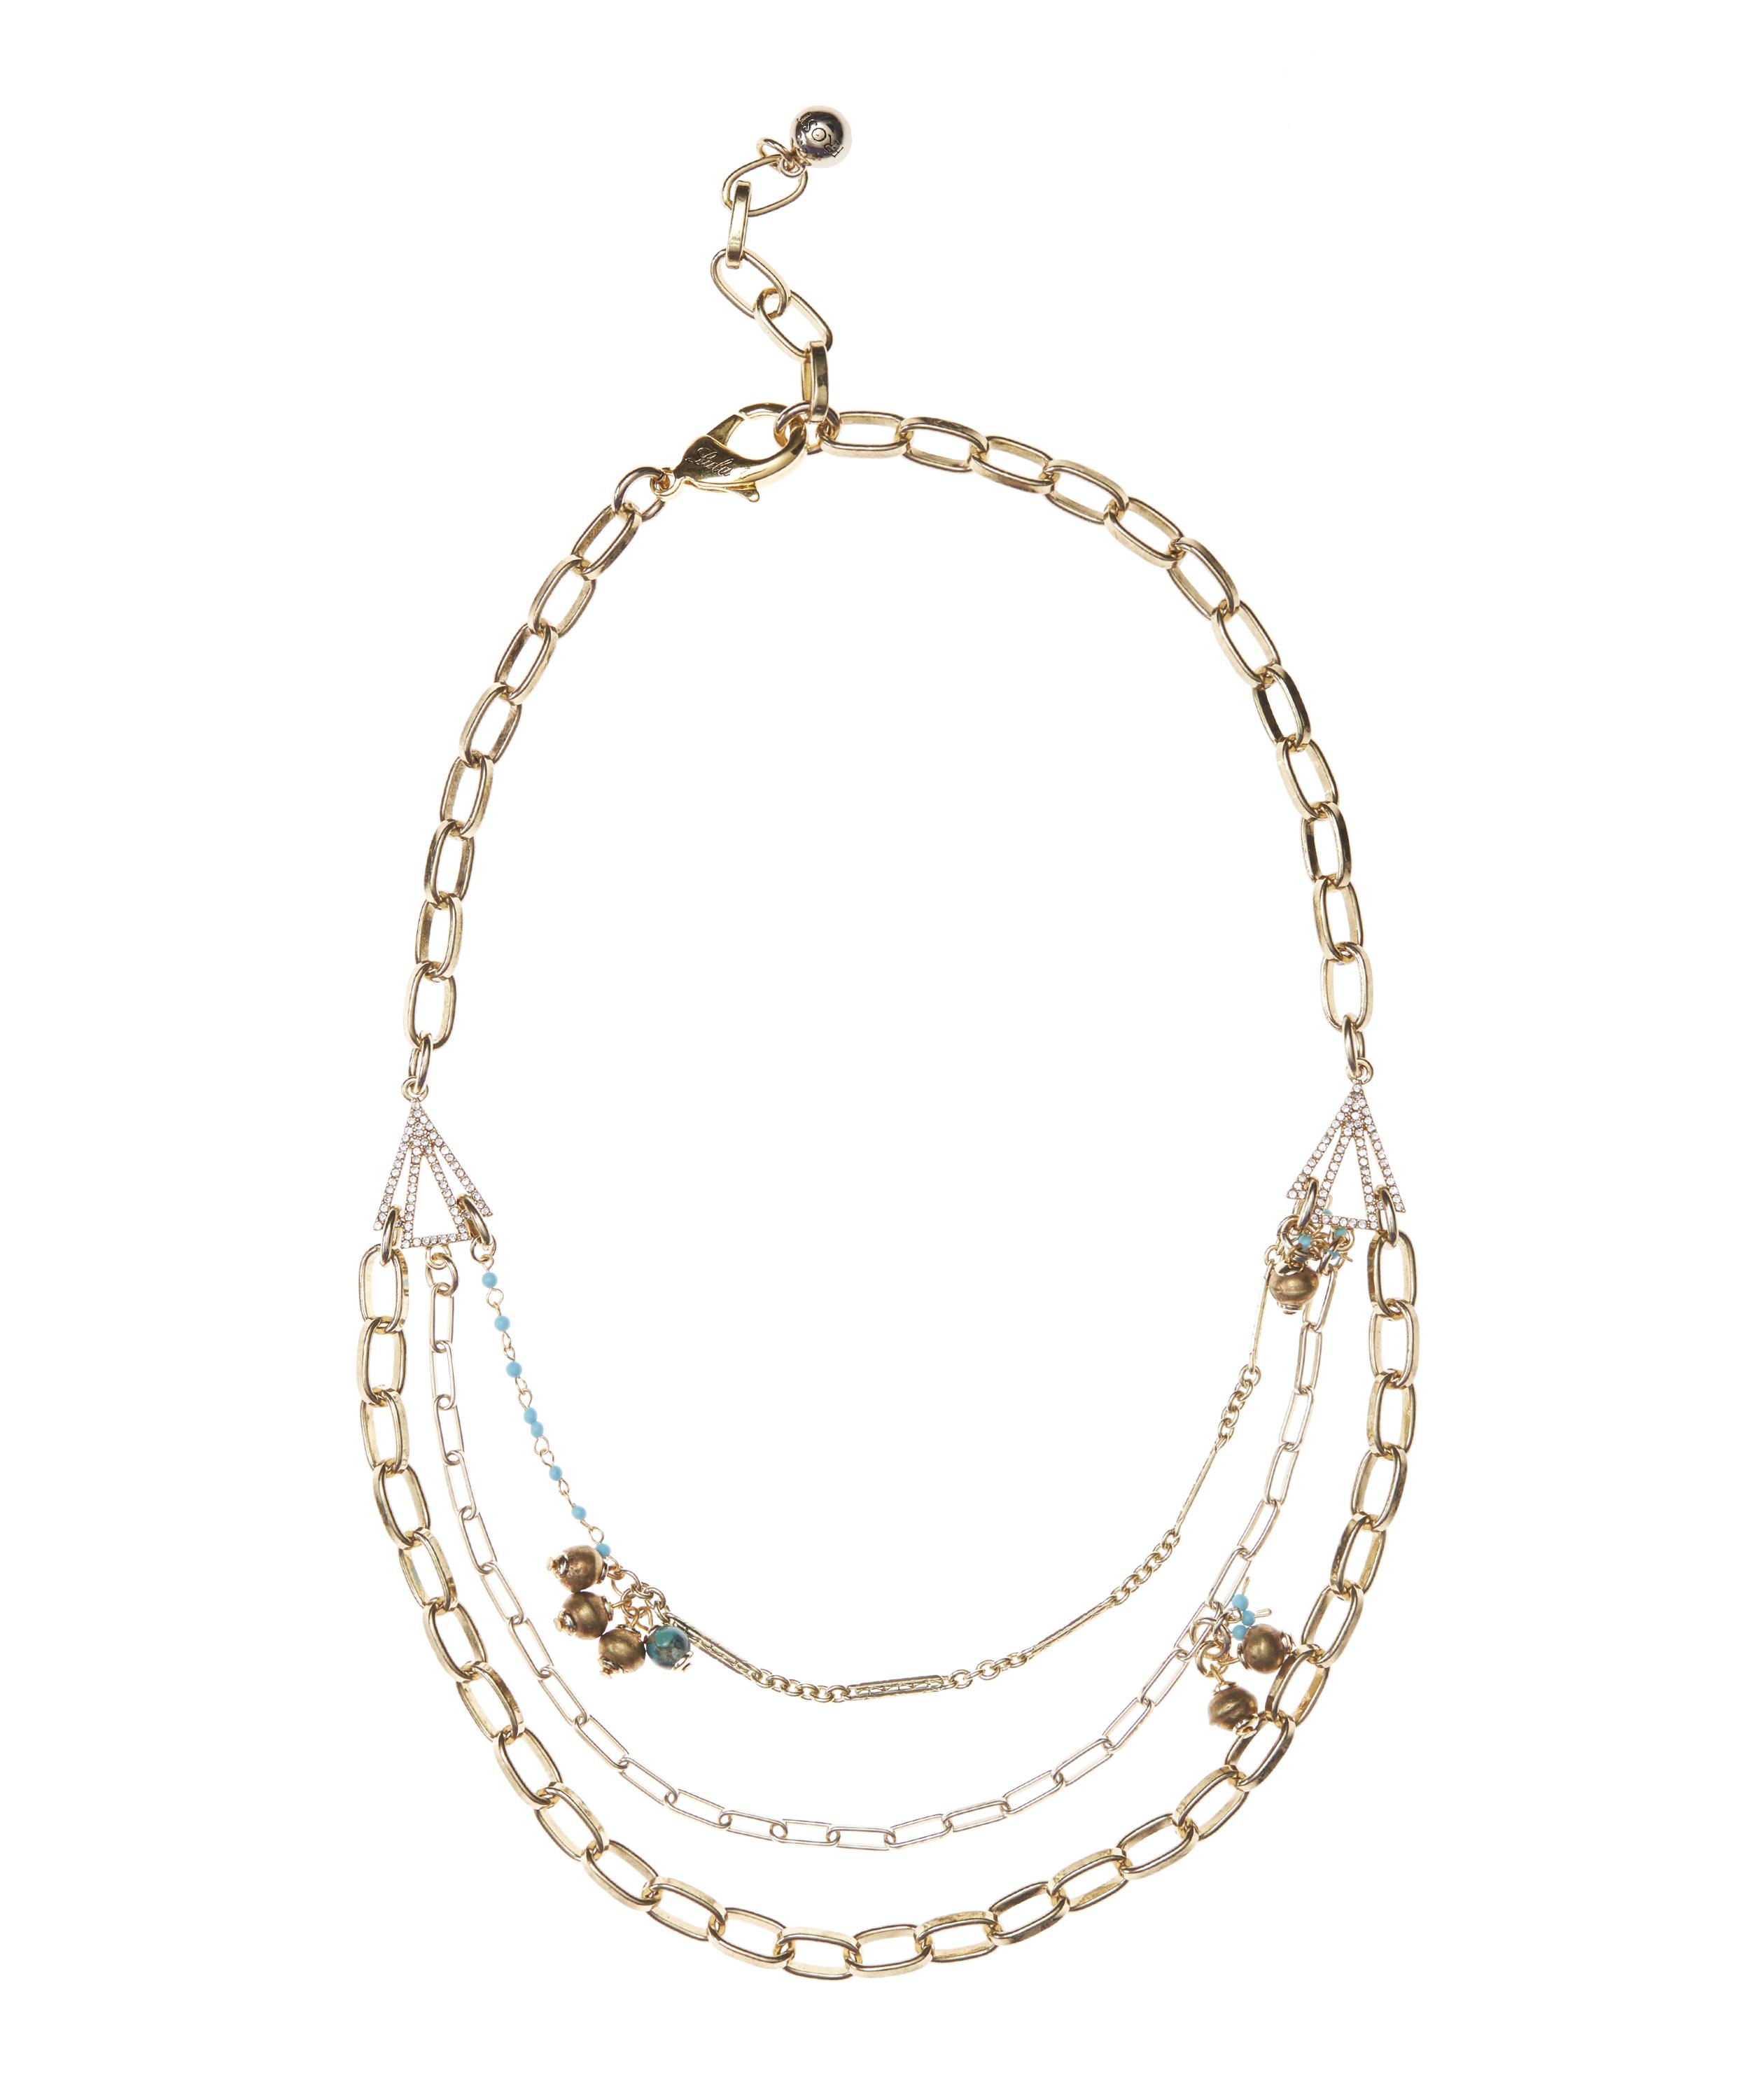 Antique Gold-Plated Discovery Triple Row Charm Necklace | Liberty London